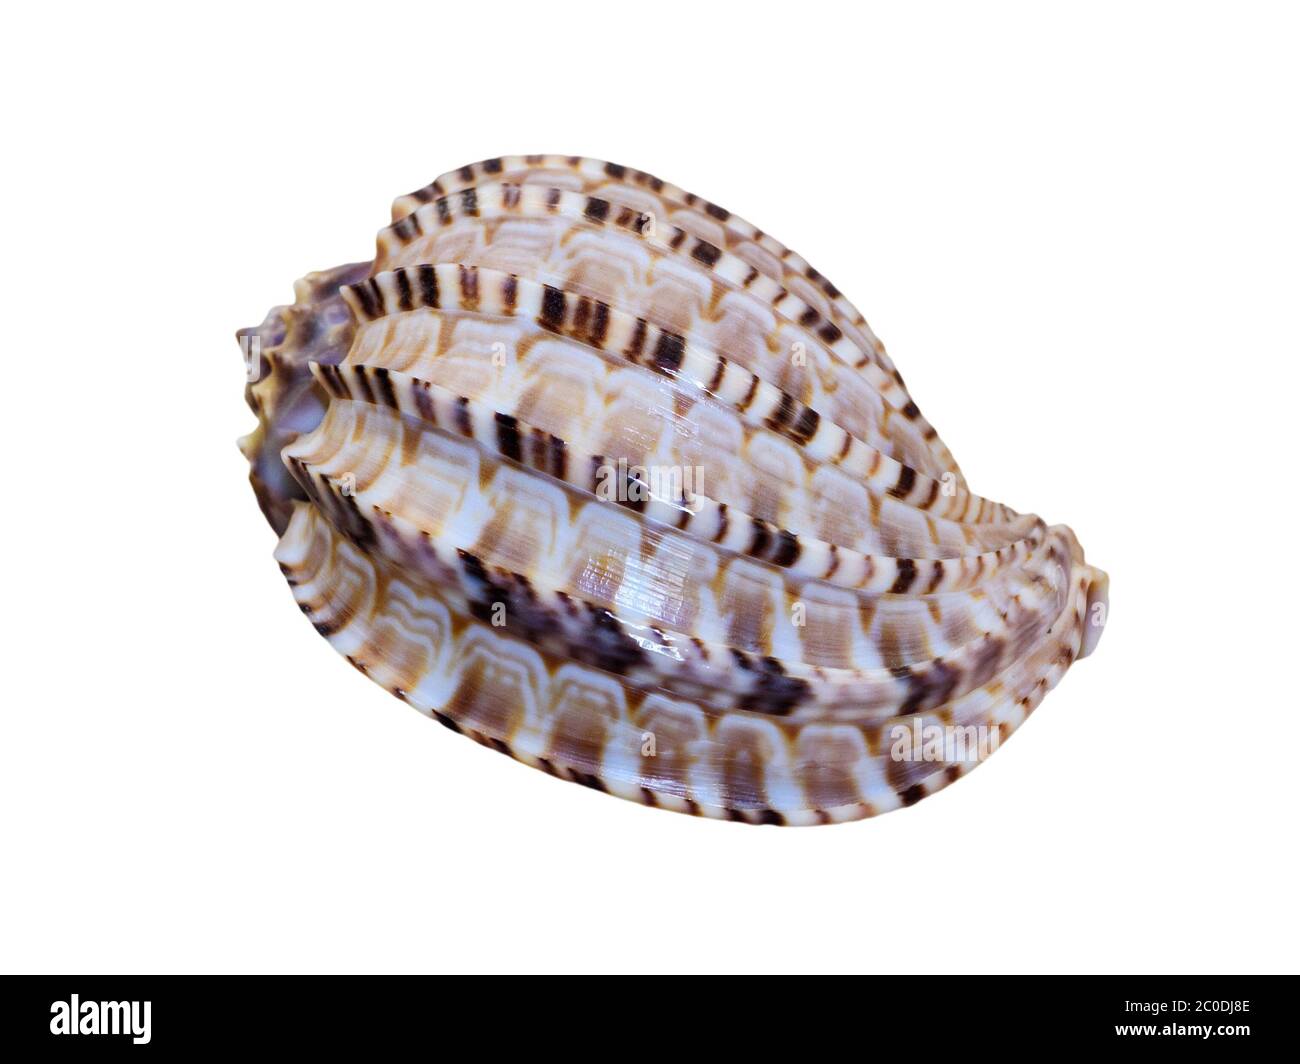 Shell of Articulate Harp or Harpa Articularis Stock Photo